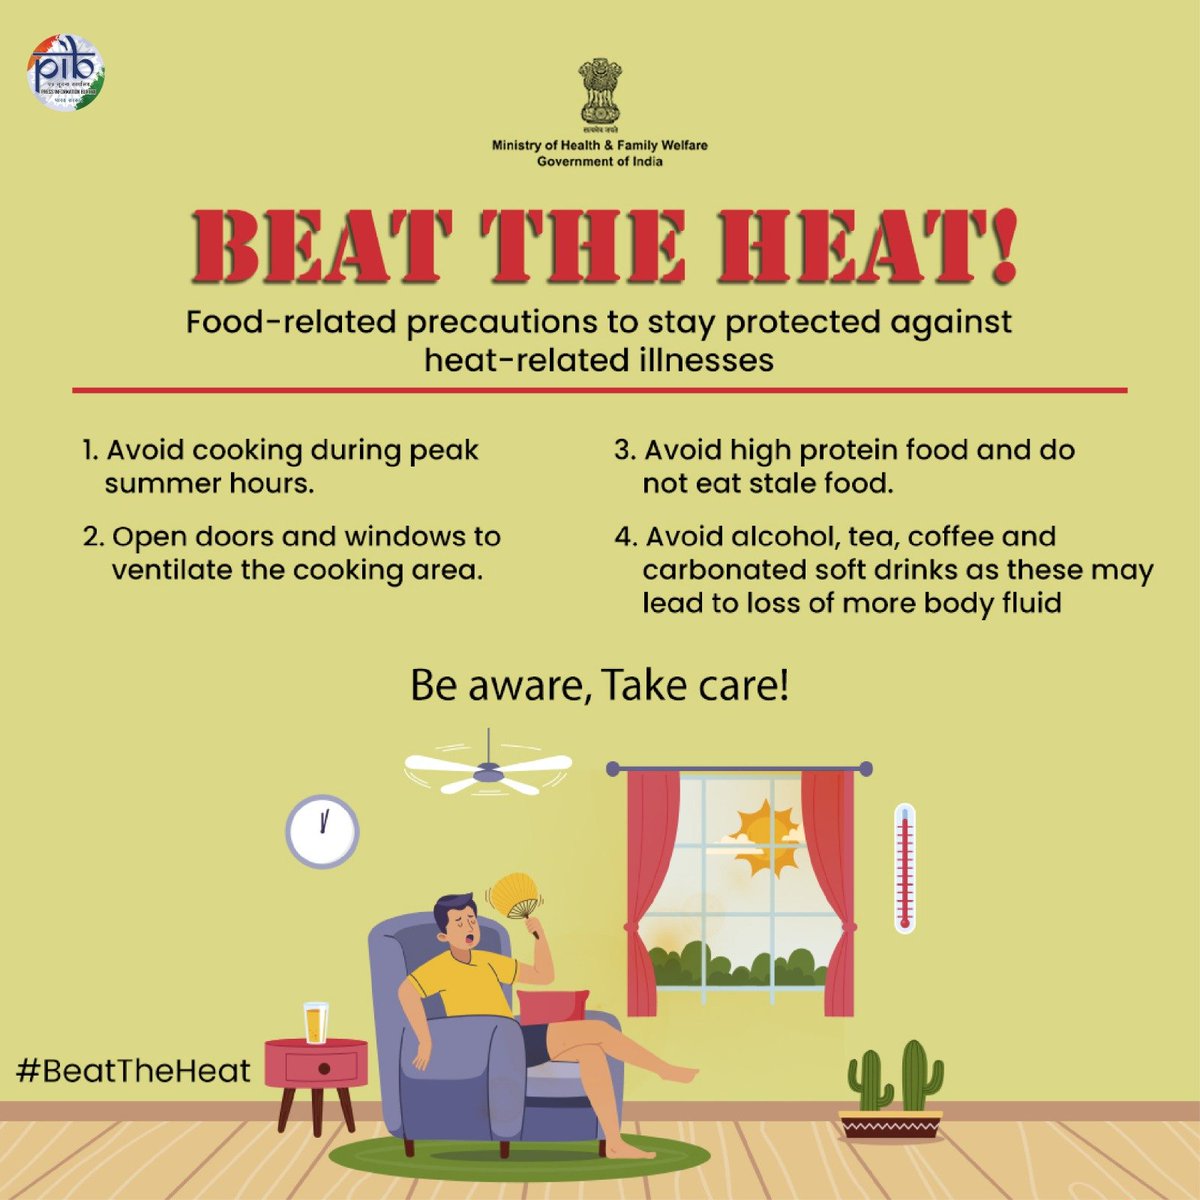 Important precautions to take care of during this summer season☀️ 💠Avoid cooking during peak summer hours 💠Open doors and windows to ventilate the cooking area #BeatTheHeat #HeatWave